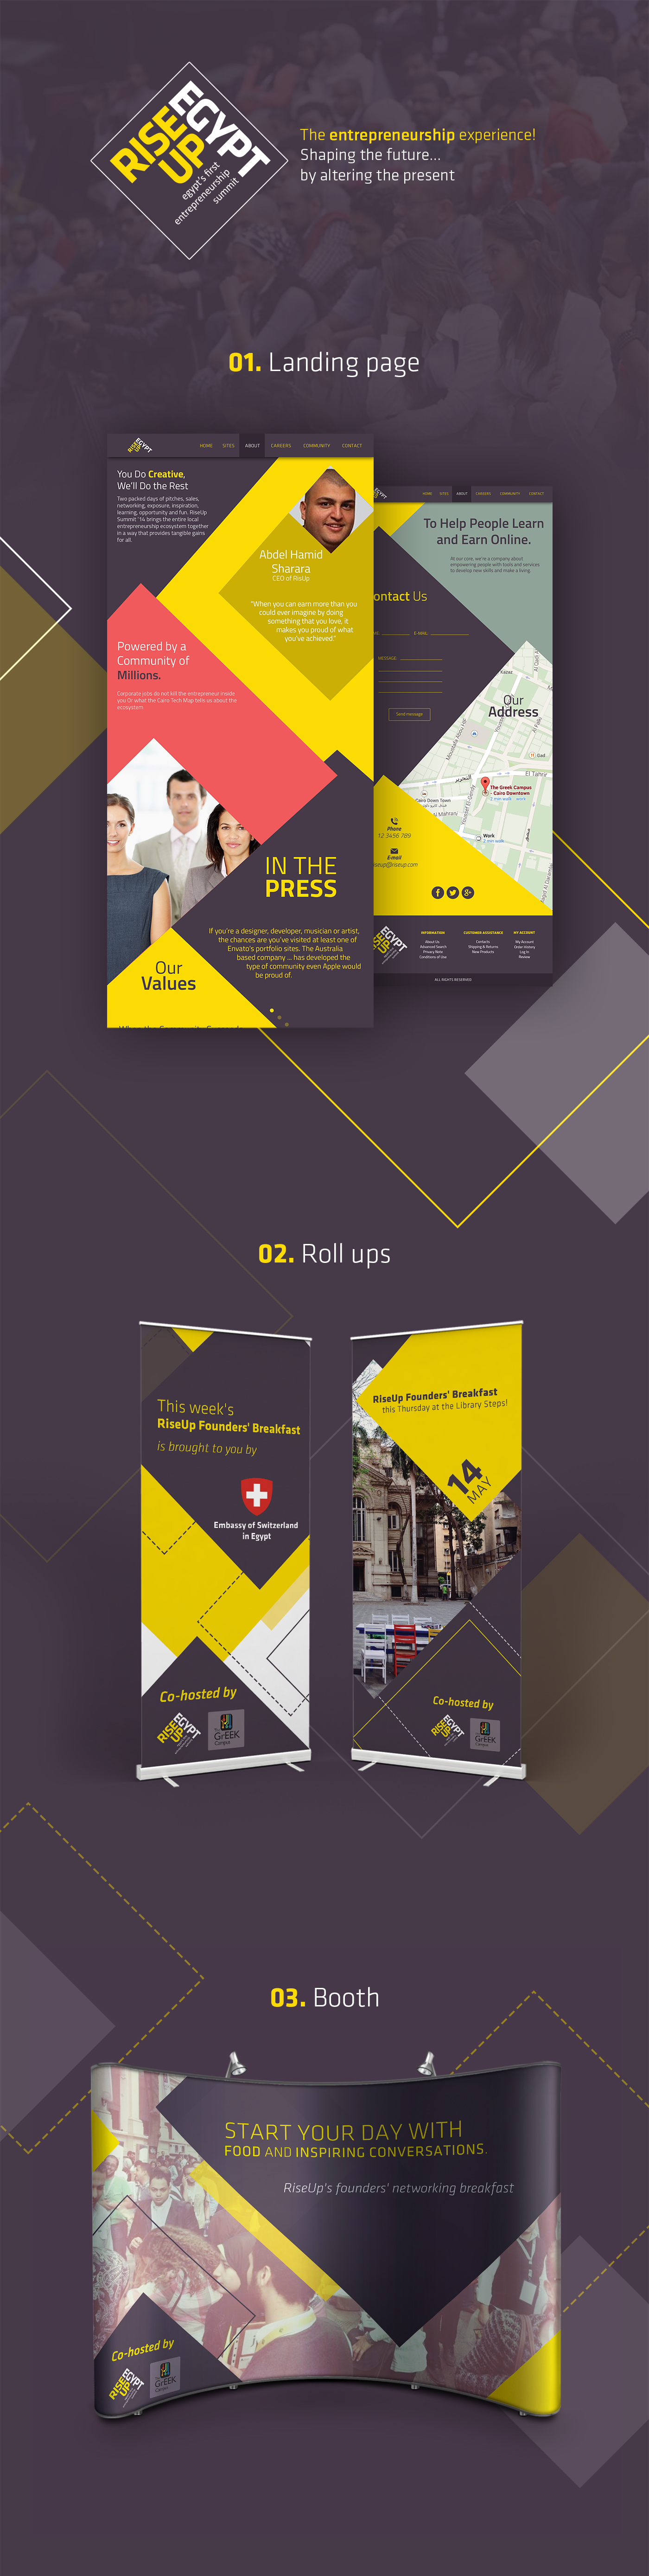 rollup Roll Up design landing page Web pop up Popup booth